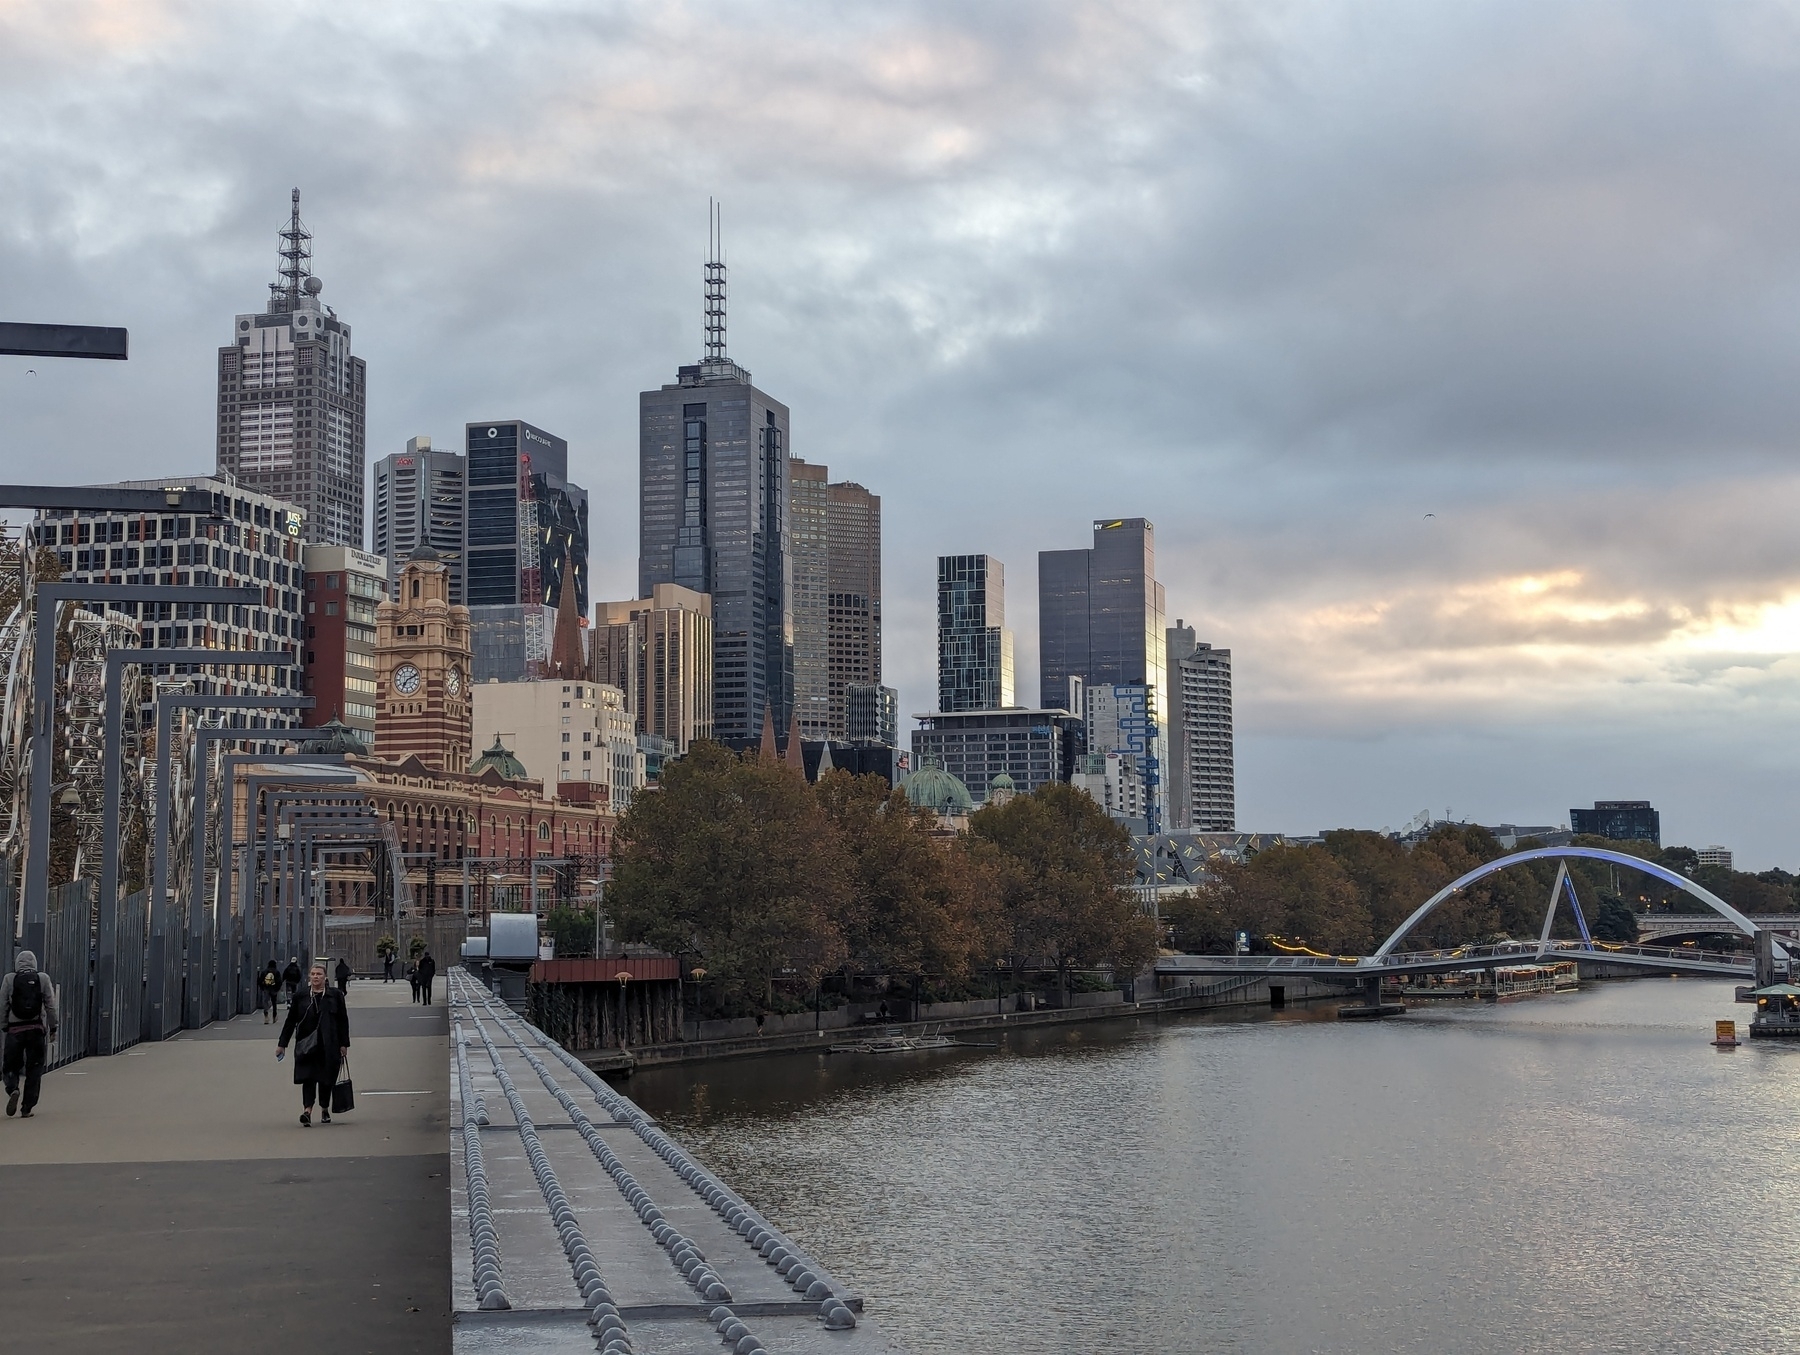 Photo of the Melbourne skyline, facing Flinders St. station and the CBD, with the pedestrian bridge on the right, as taken from a bridge with an iron railing over the Yarra River.